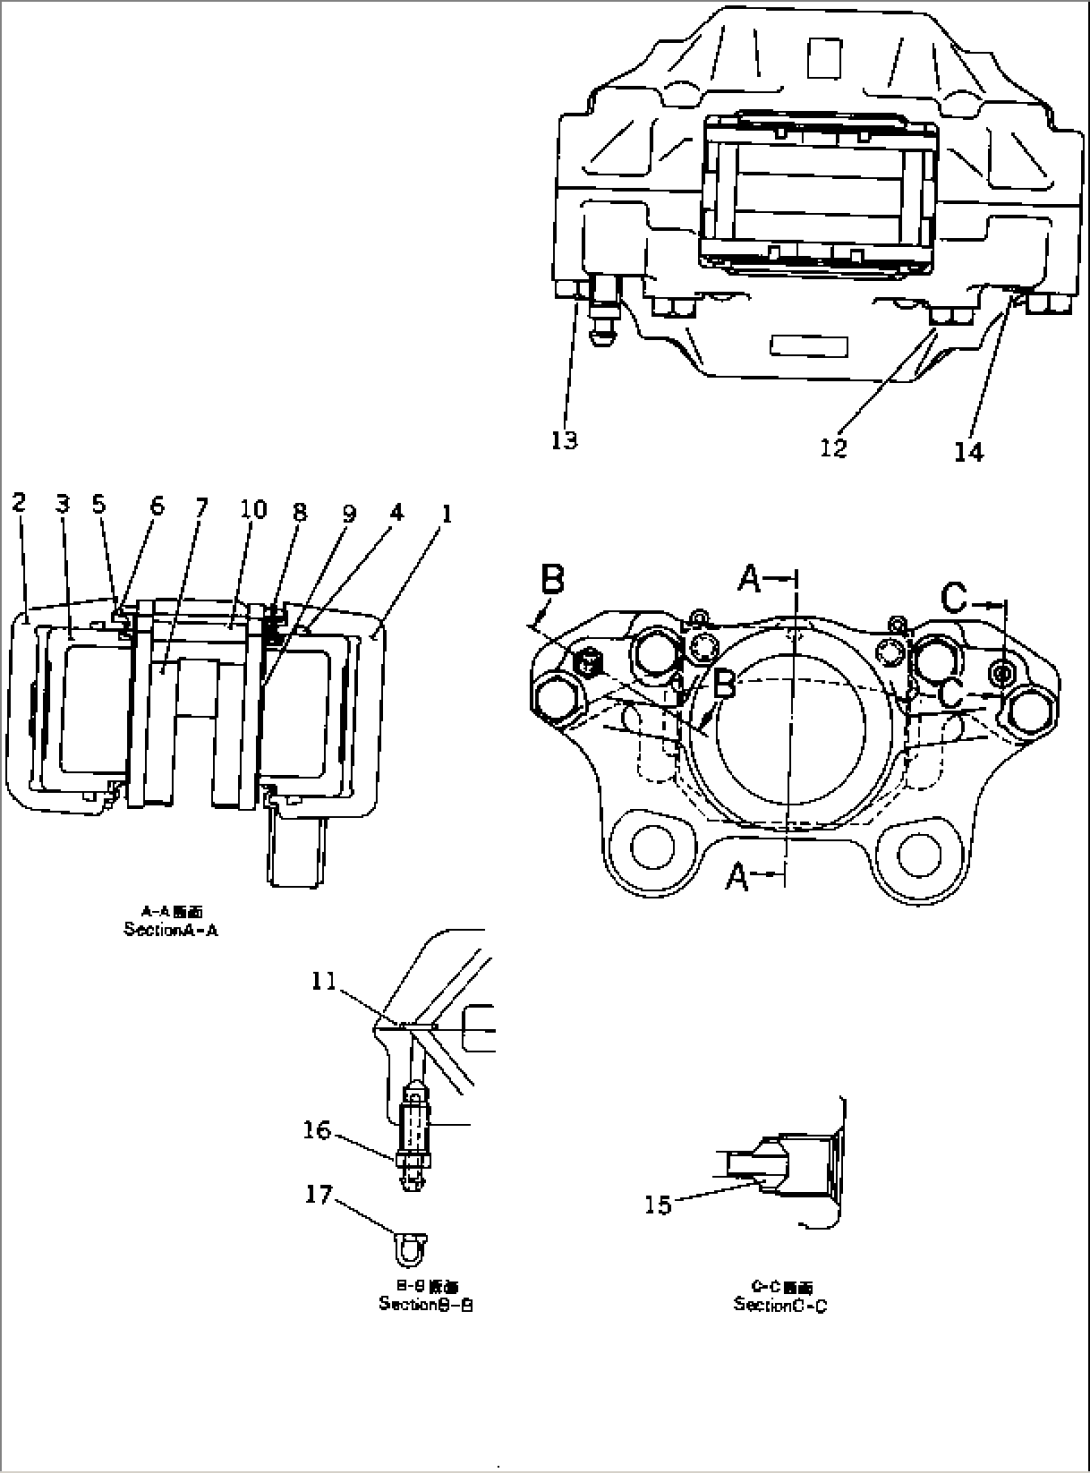 DISC BRAKE (FRONT AND REAR)(#1001-1602)